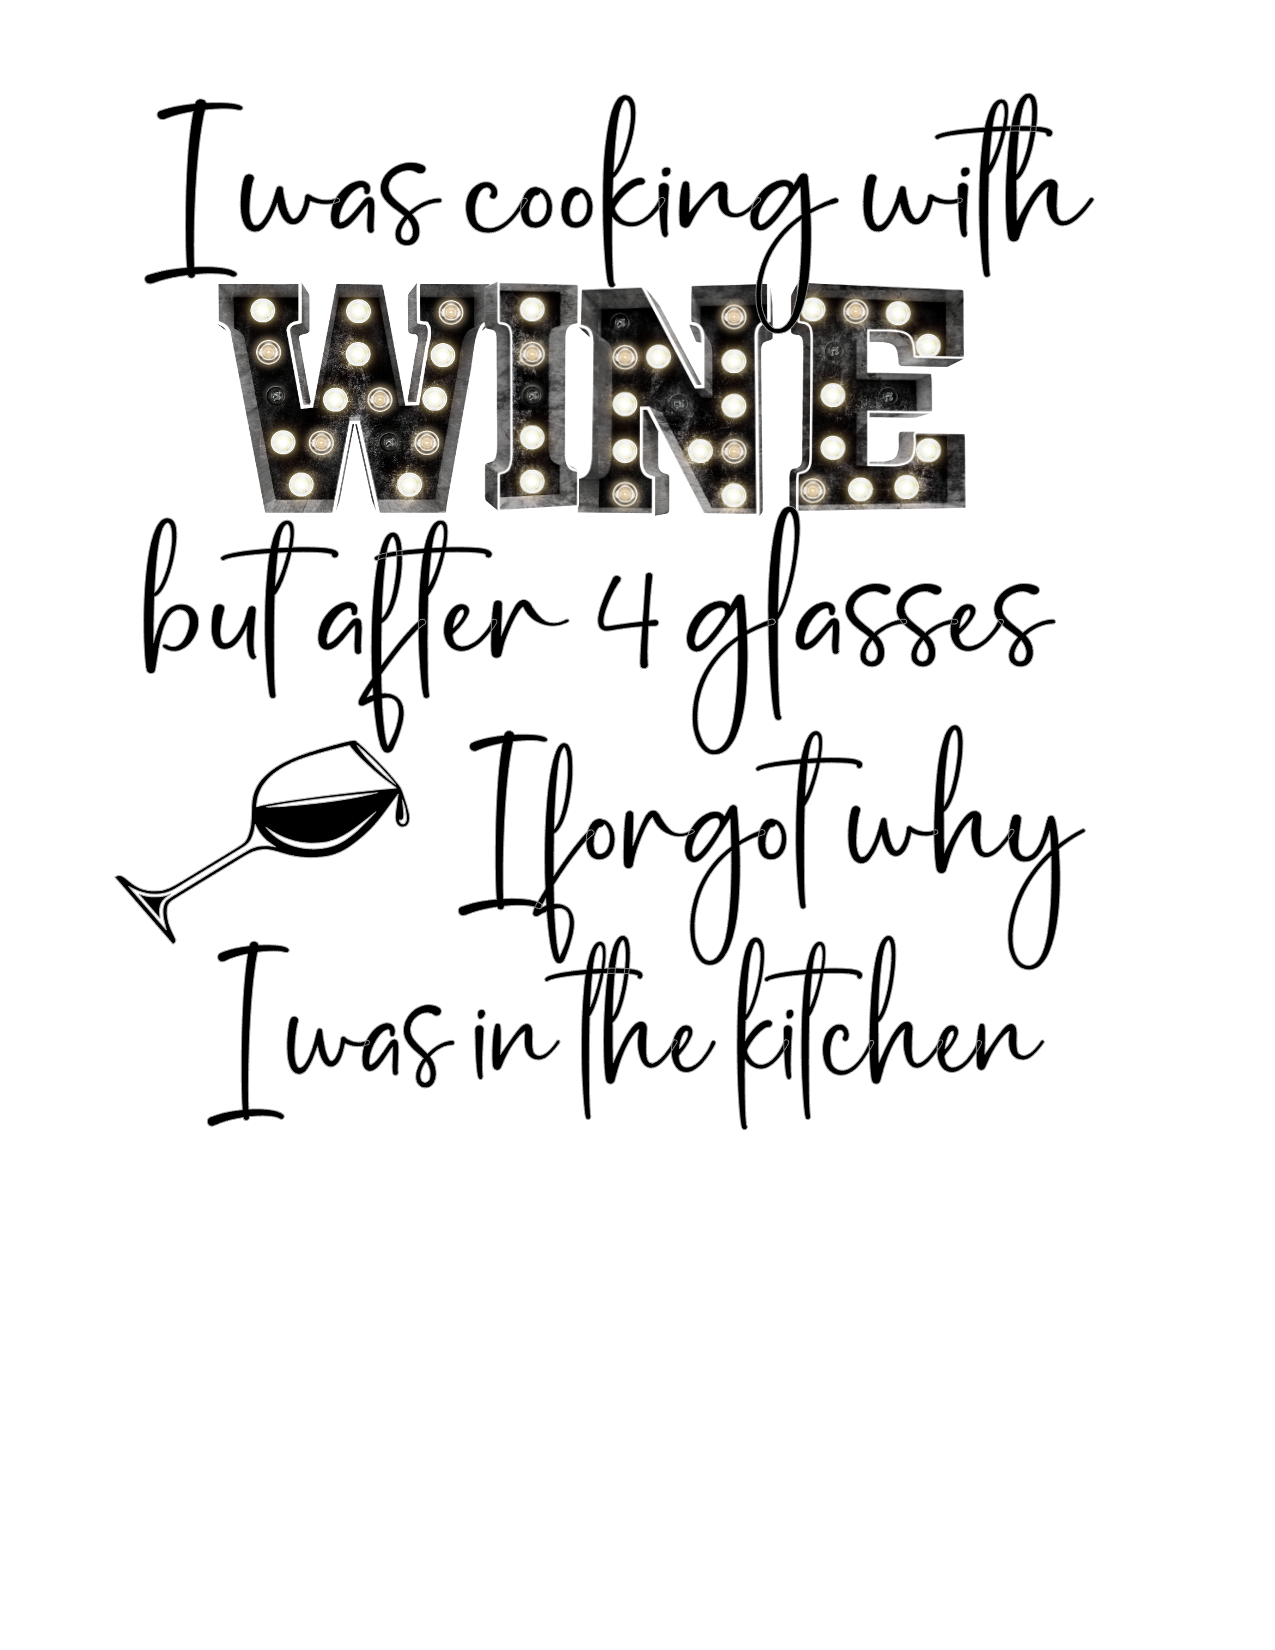 #192 I was cooking with Wine but after 4 glasses I forgot why I was in the kitchen